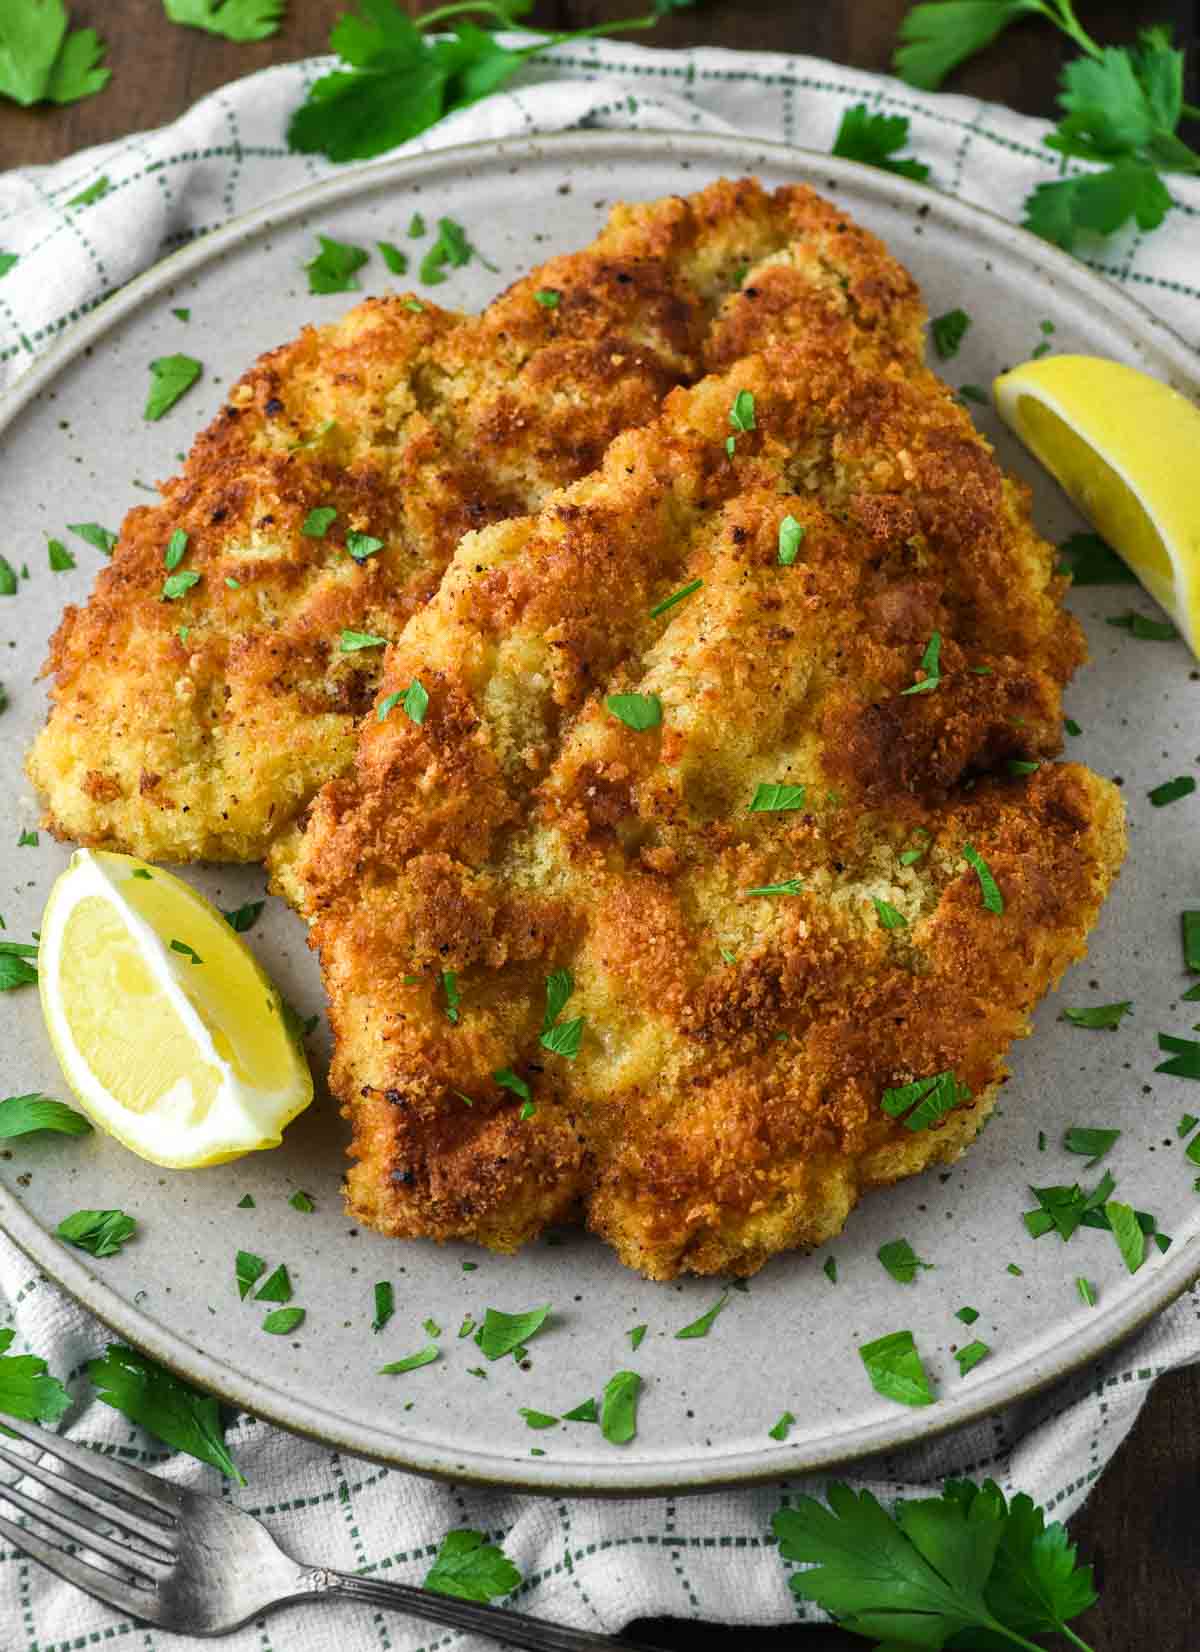 chicken schnitzel on speckled plate with lemon